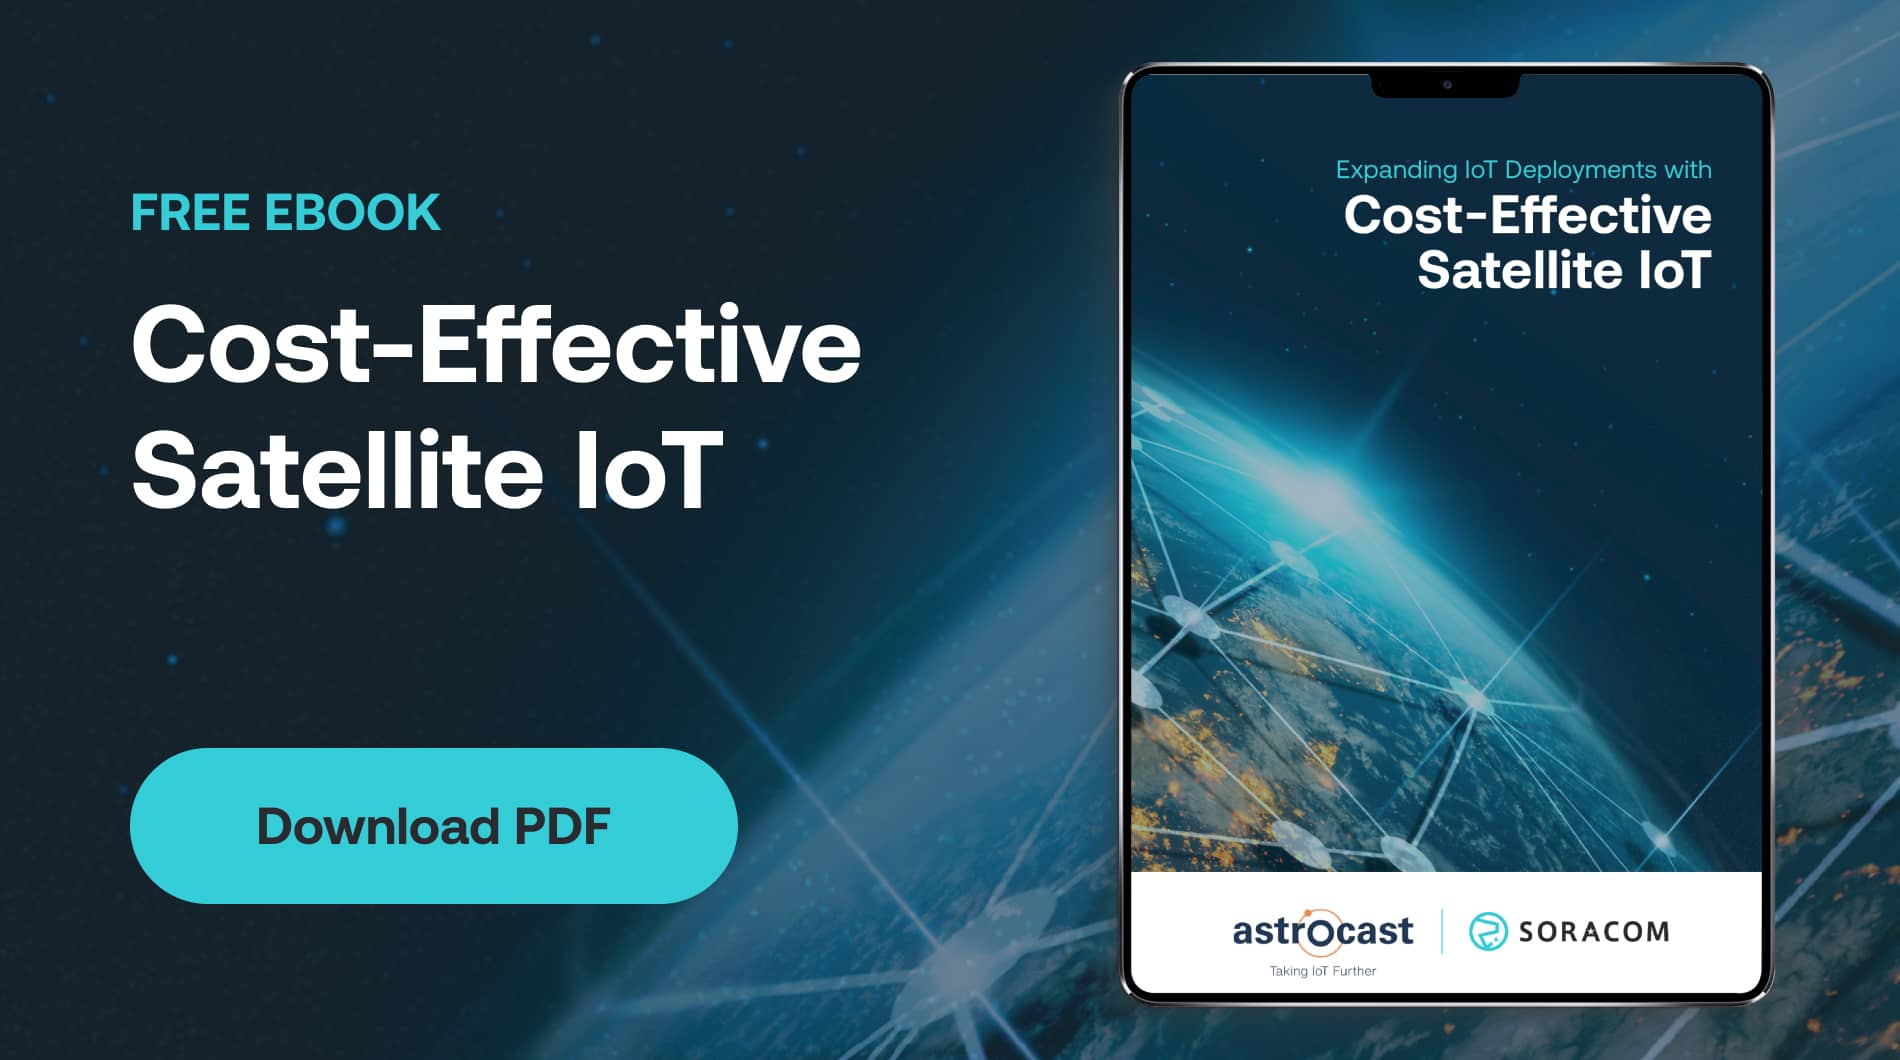 Expanding IoT Deployments with Cost-Effective Satellite IoT – More info